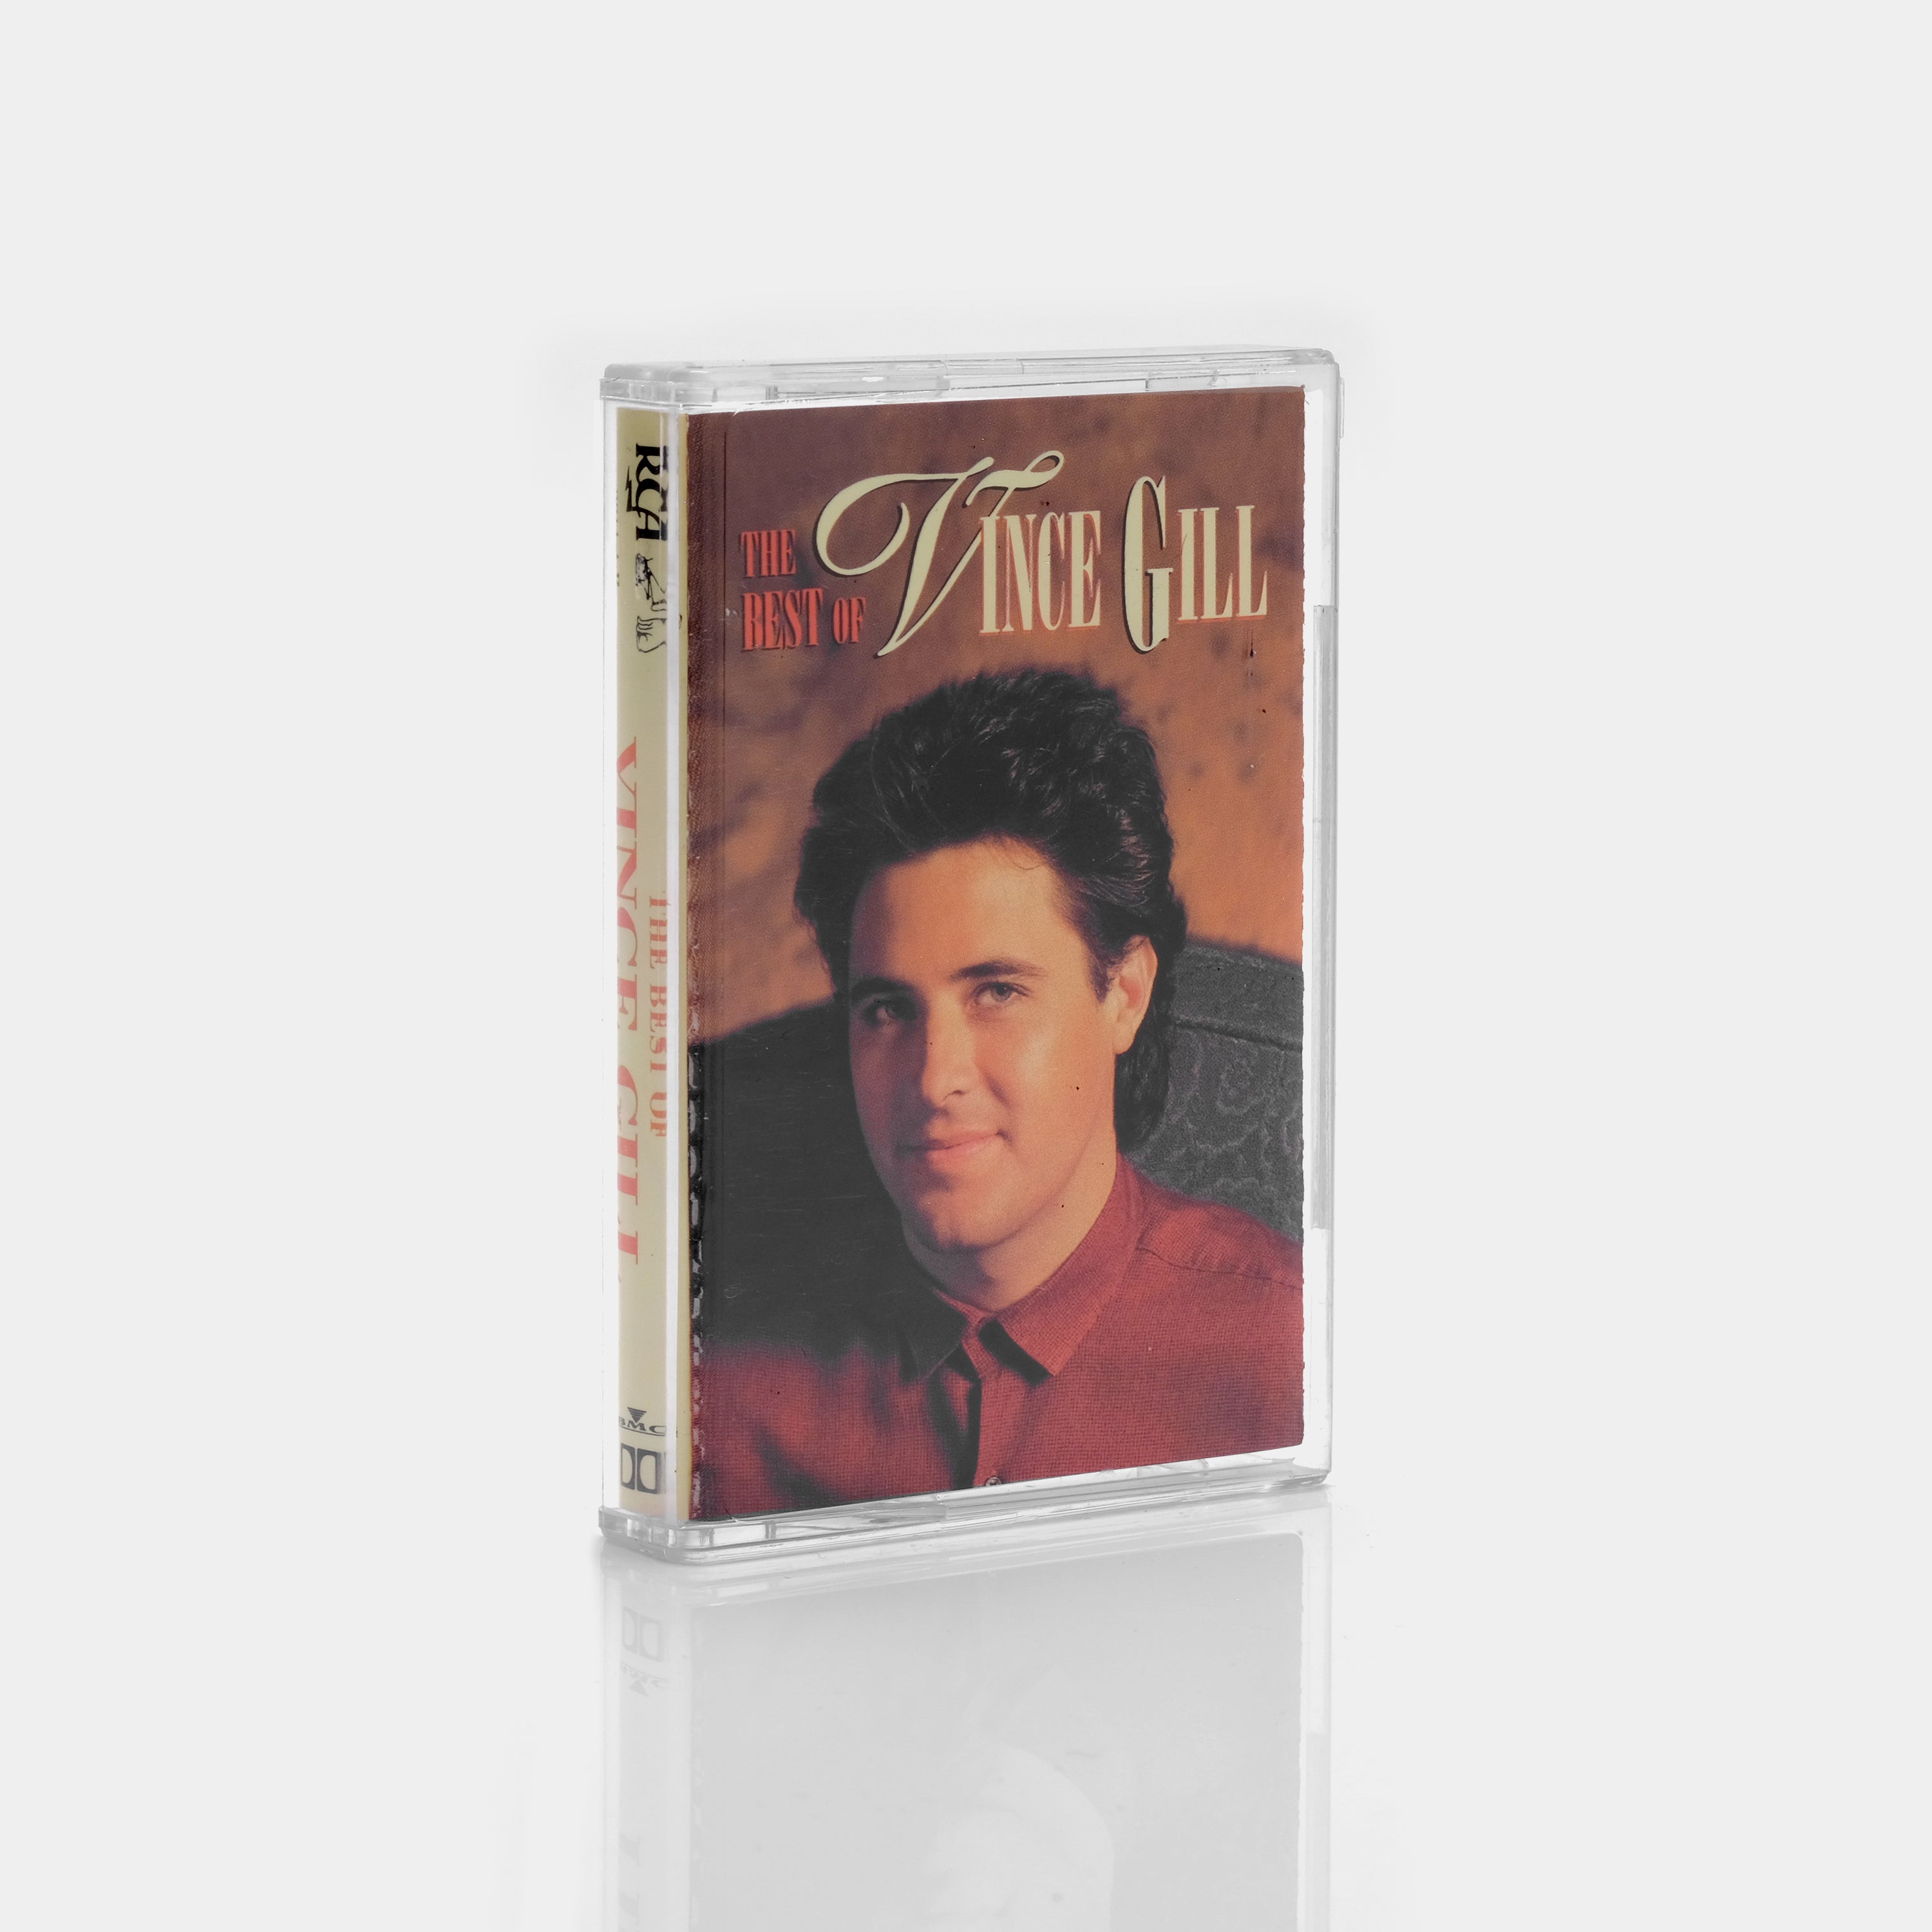 Vince Gill - The Best Of Vince Gill Cassette Tape